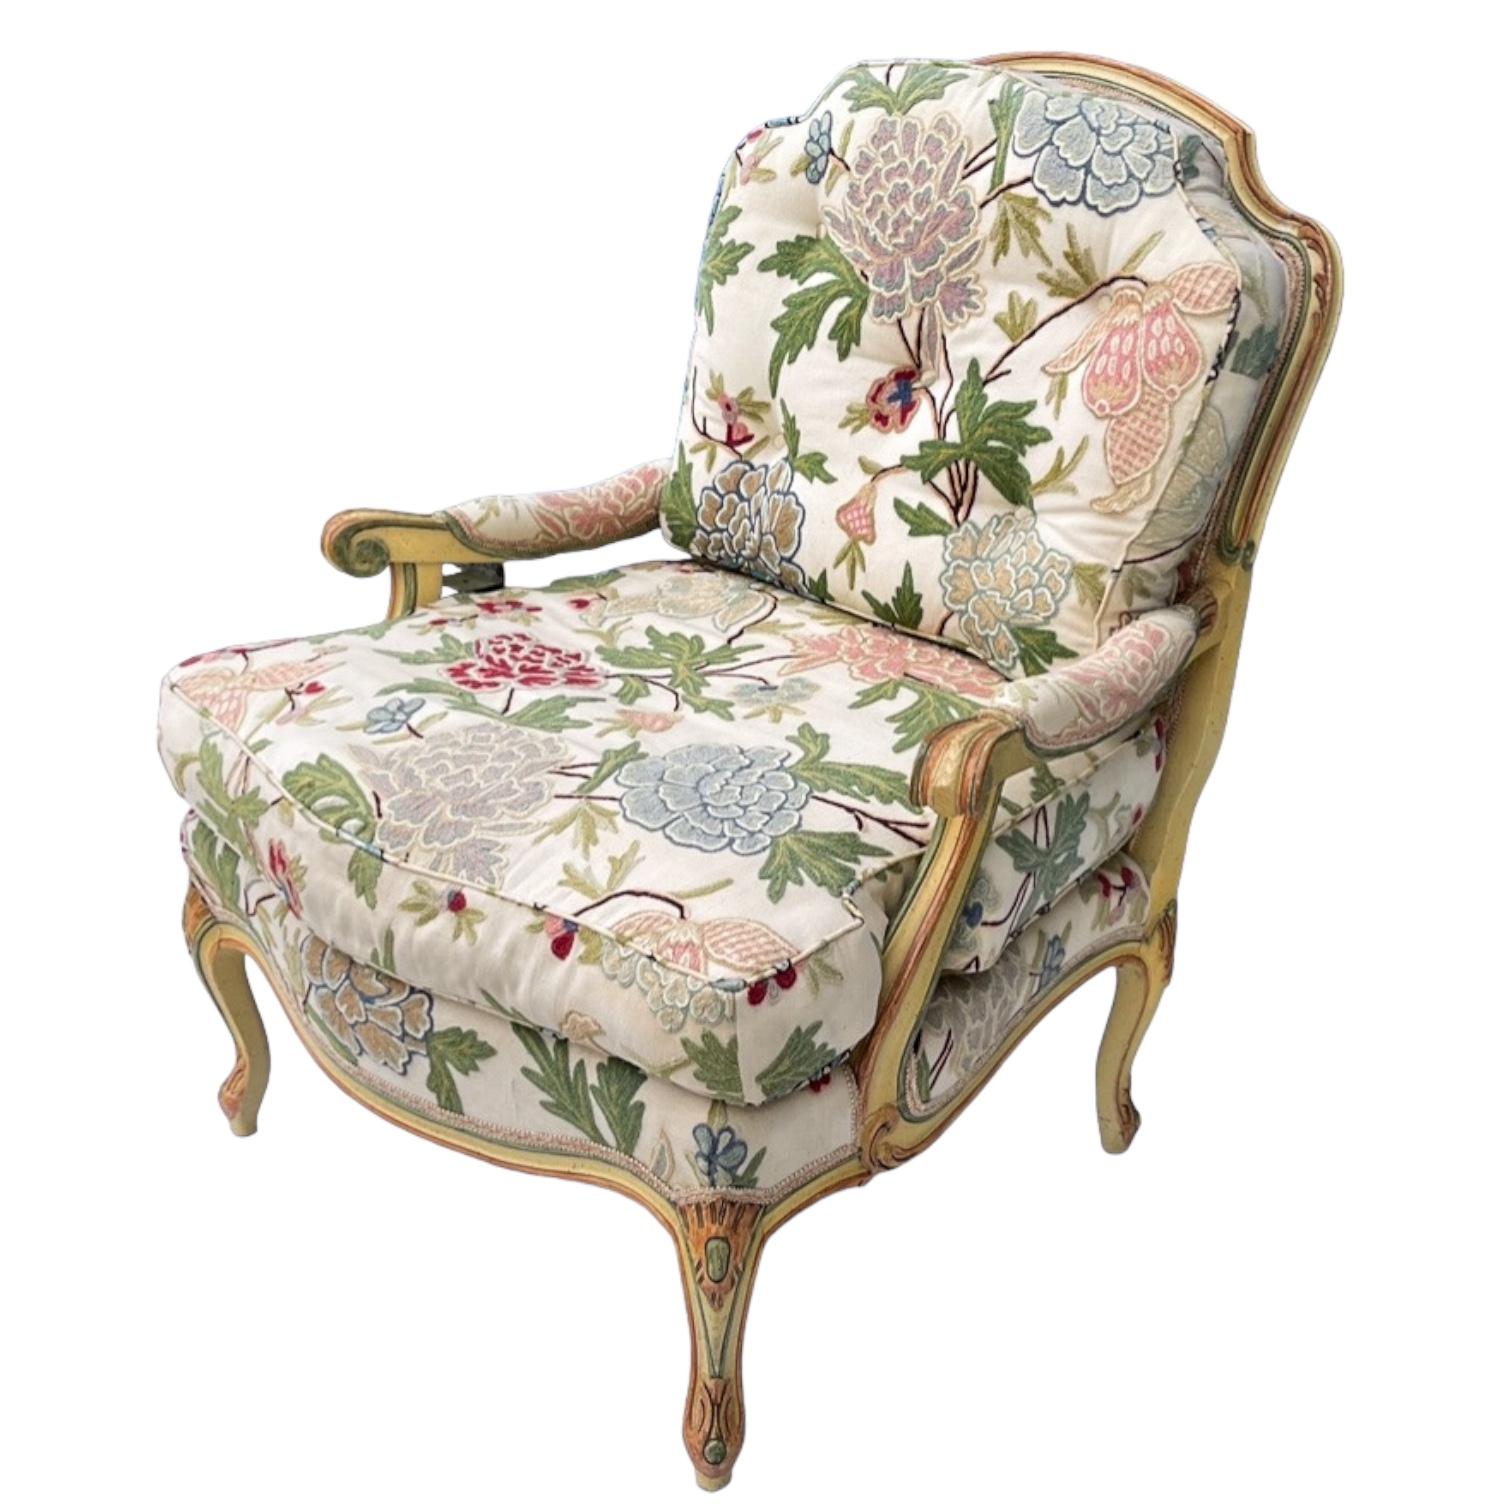 This is a pretty French Louis XV style bergere chair upholstered in a floral crewel. The frame is painted ivory, rose, and celadon. It is unmarked and most likely dates to the 1980s.